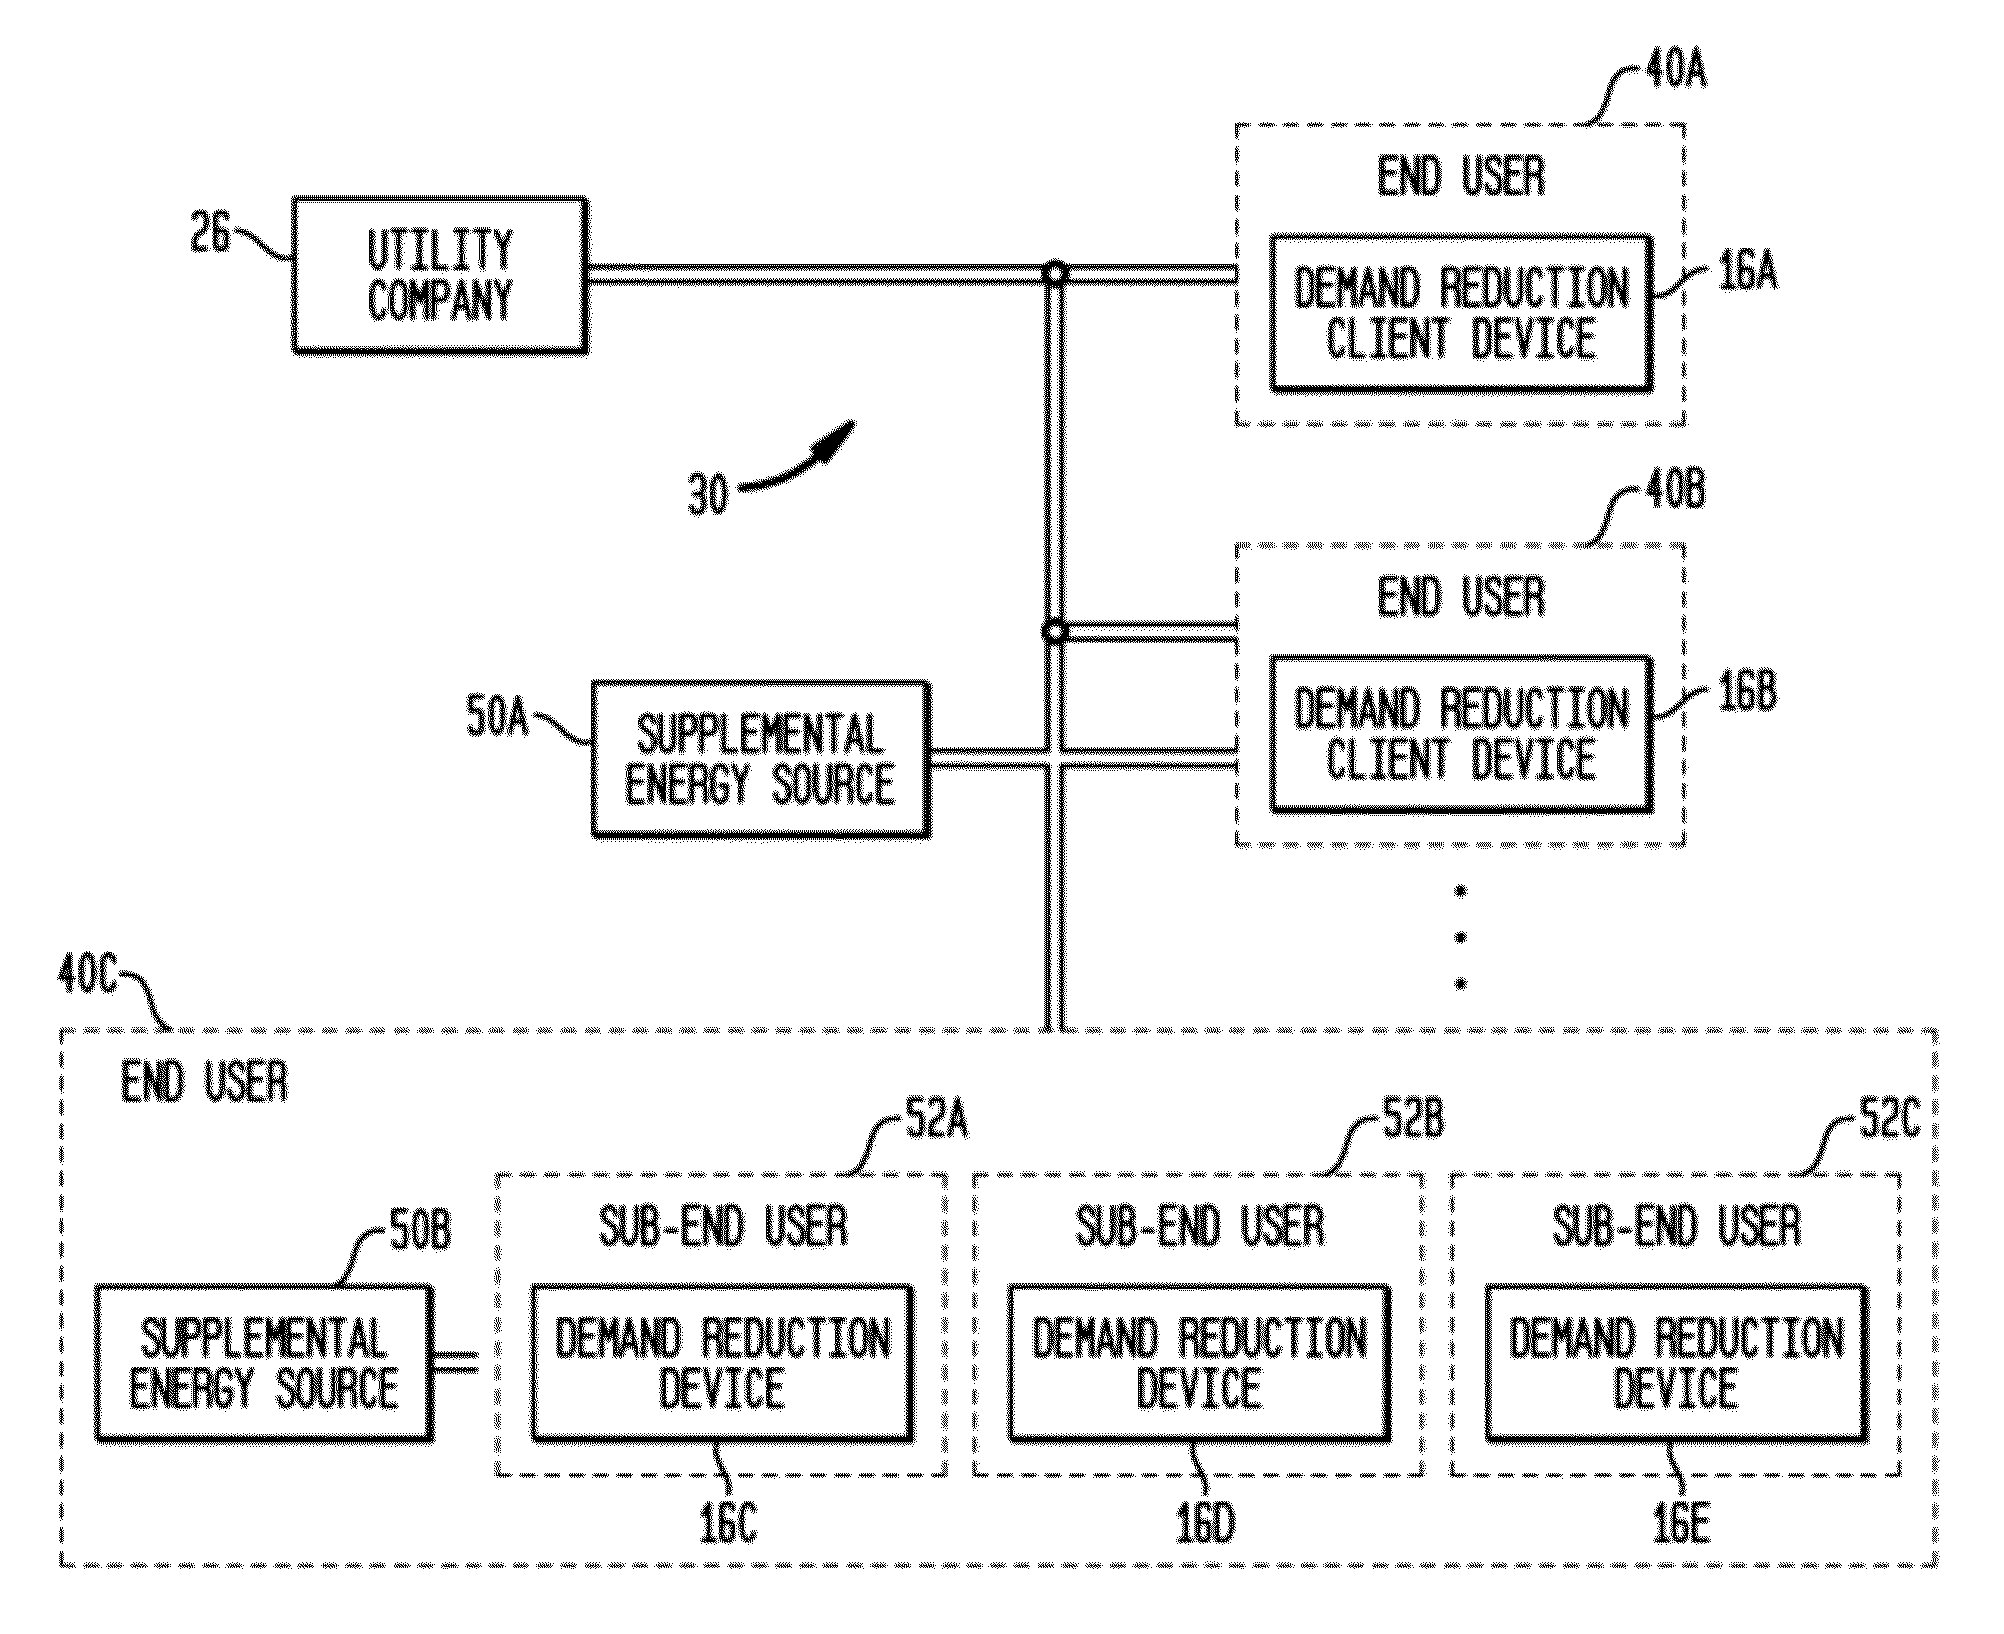 Method and system for automatically adapting end user power usage